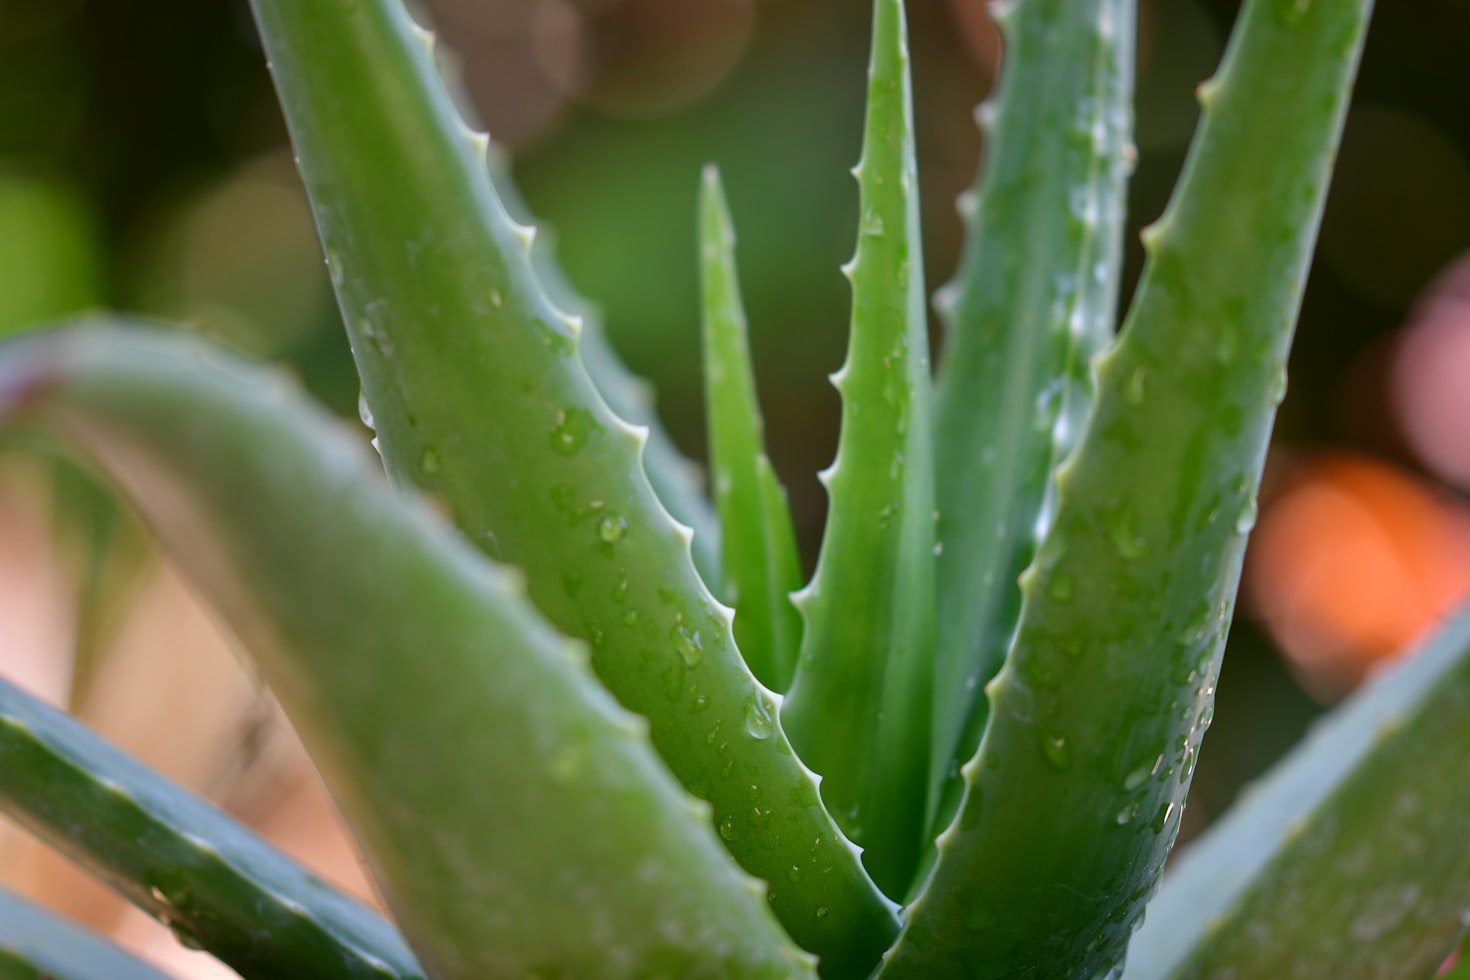 Several leaves of an aloe vera plant.